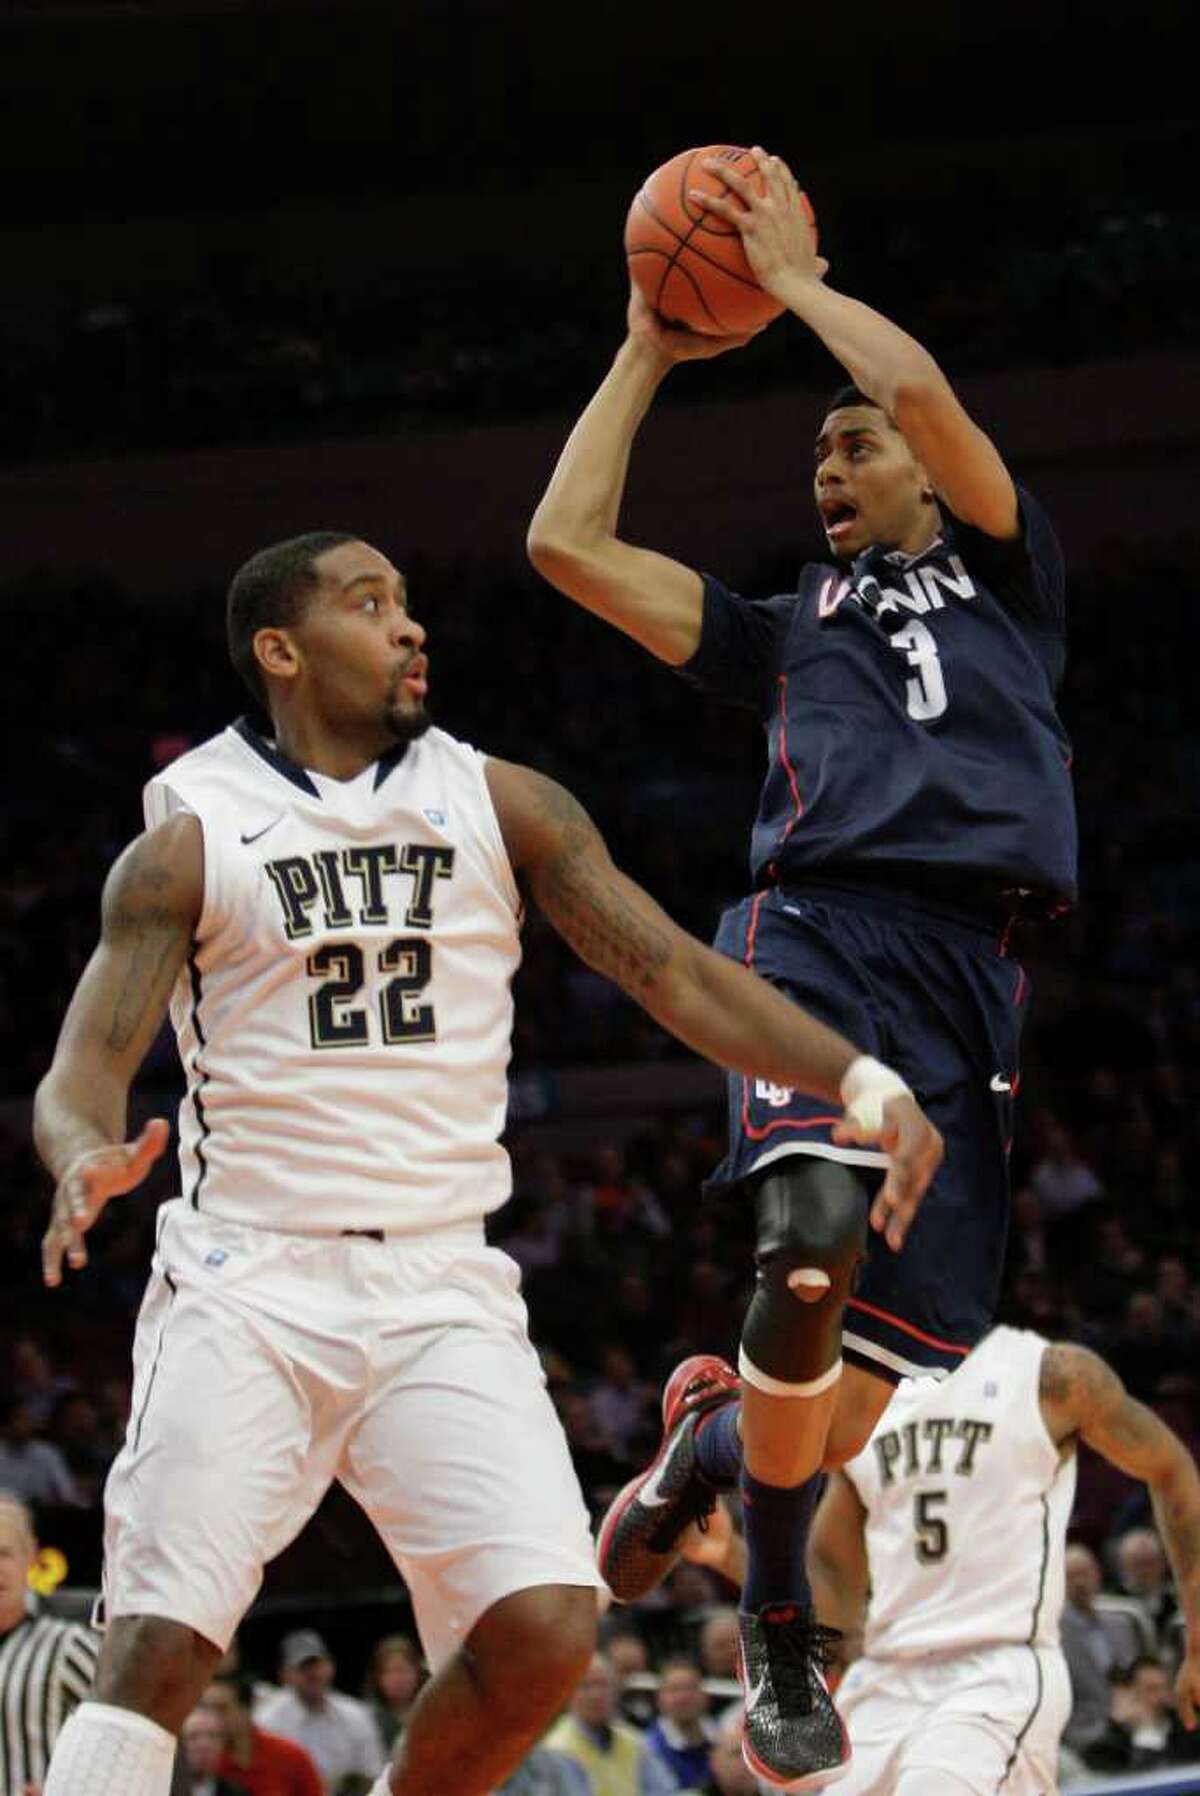 Connecticut's Jeremy Lamb (3) goes to the basket past Pittsburgh's Brad Wanamaker (22) during the first half of an NCAA college basketball game at the Big East Championship, Thursday, March 10, 2011 at Madison Square Garden in New York. (AP Photo/Mary Altaffer)